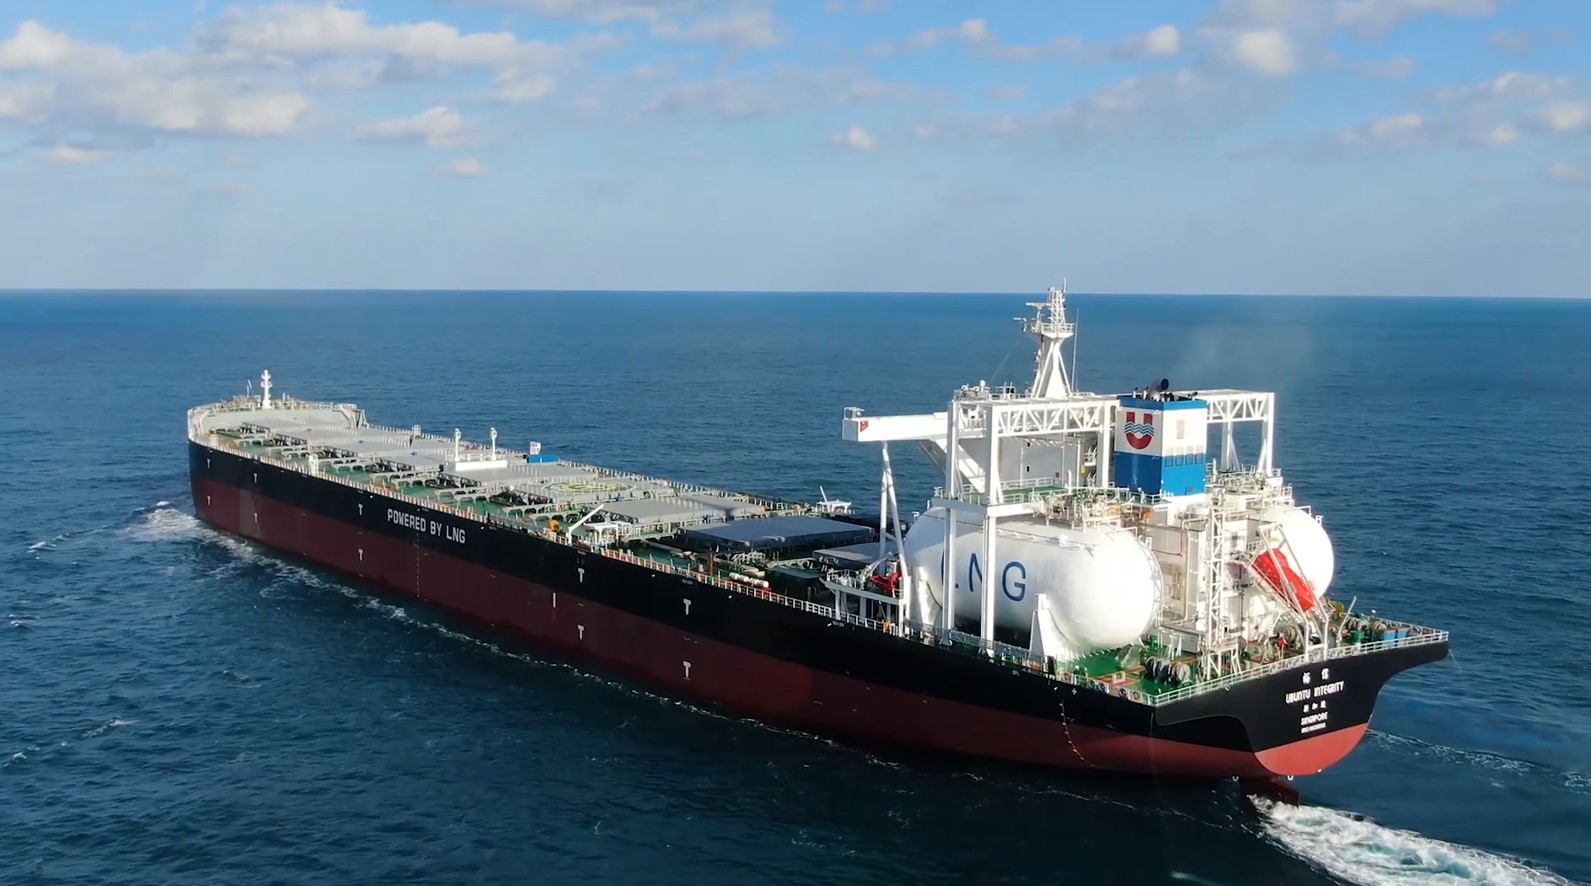 Taiwan's U-Ming plans to enter LNG carrier market